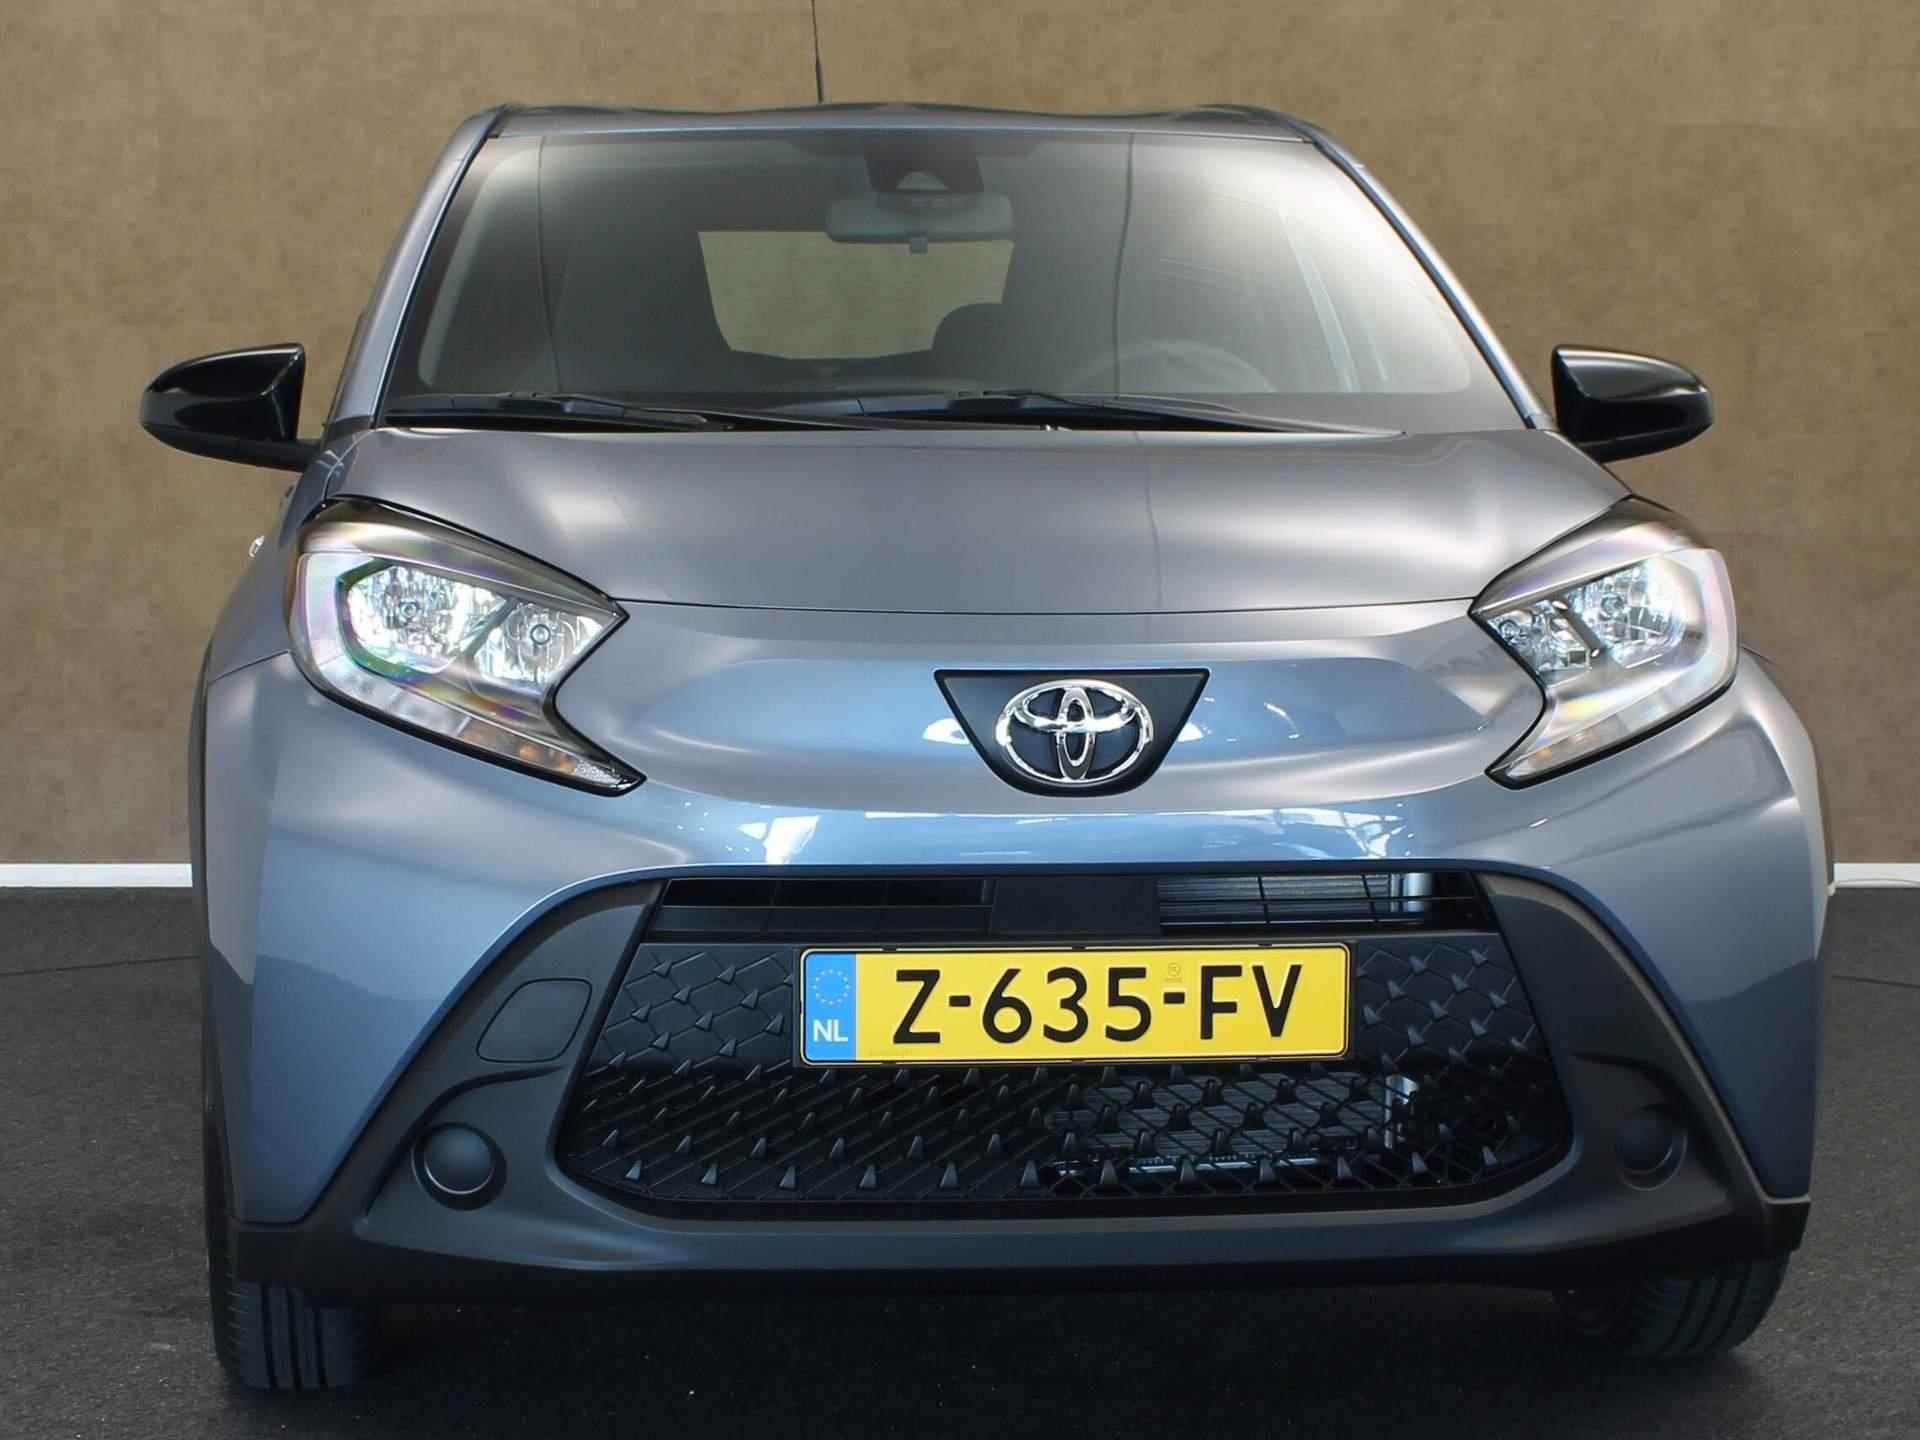 Toyota Aygo X 1.0 VVT-i S-CVT play DIRECT UIT VOORRAAD LEVERBAAR! - AUTOMAAT - APPLE CARPLAY/ANDROID AUTO - AIRCO - 6/28